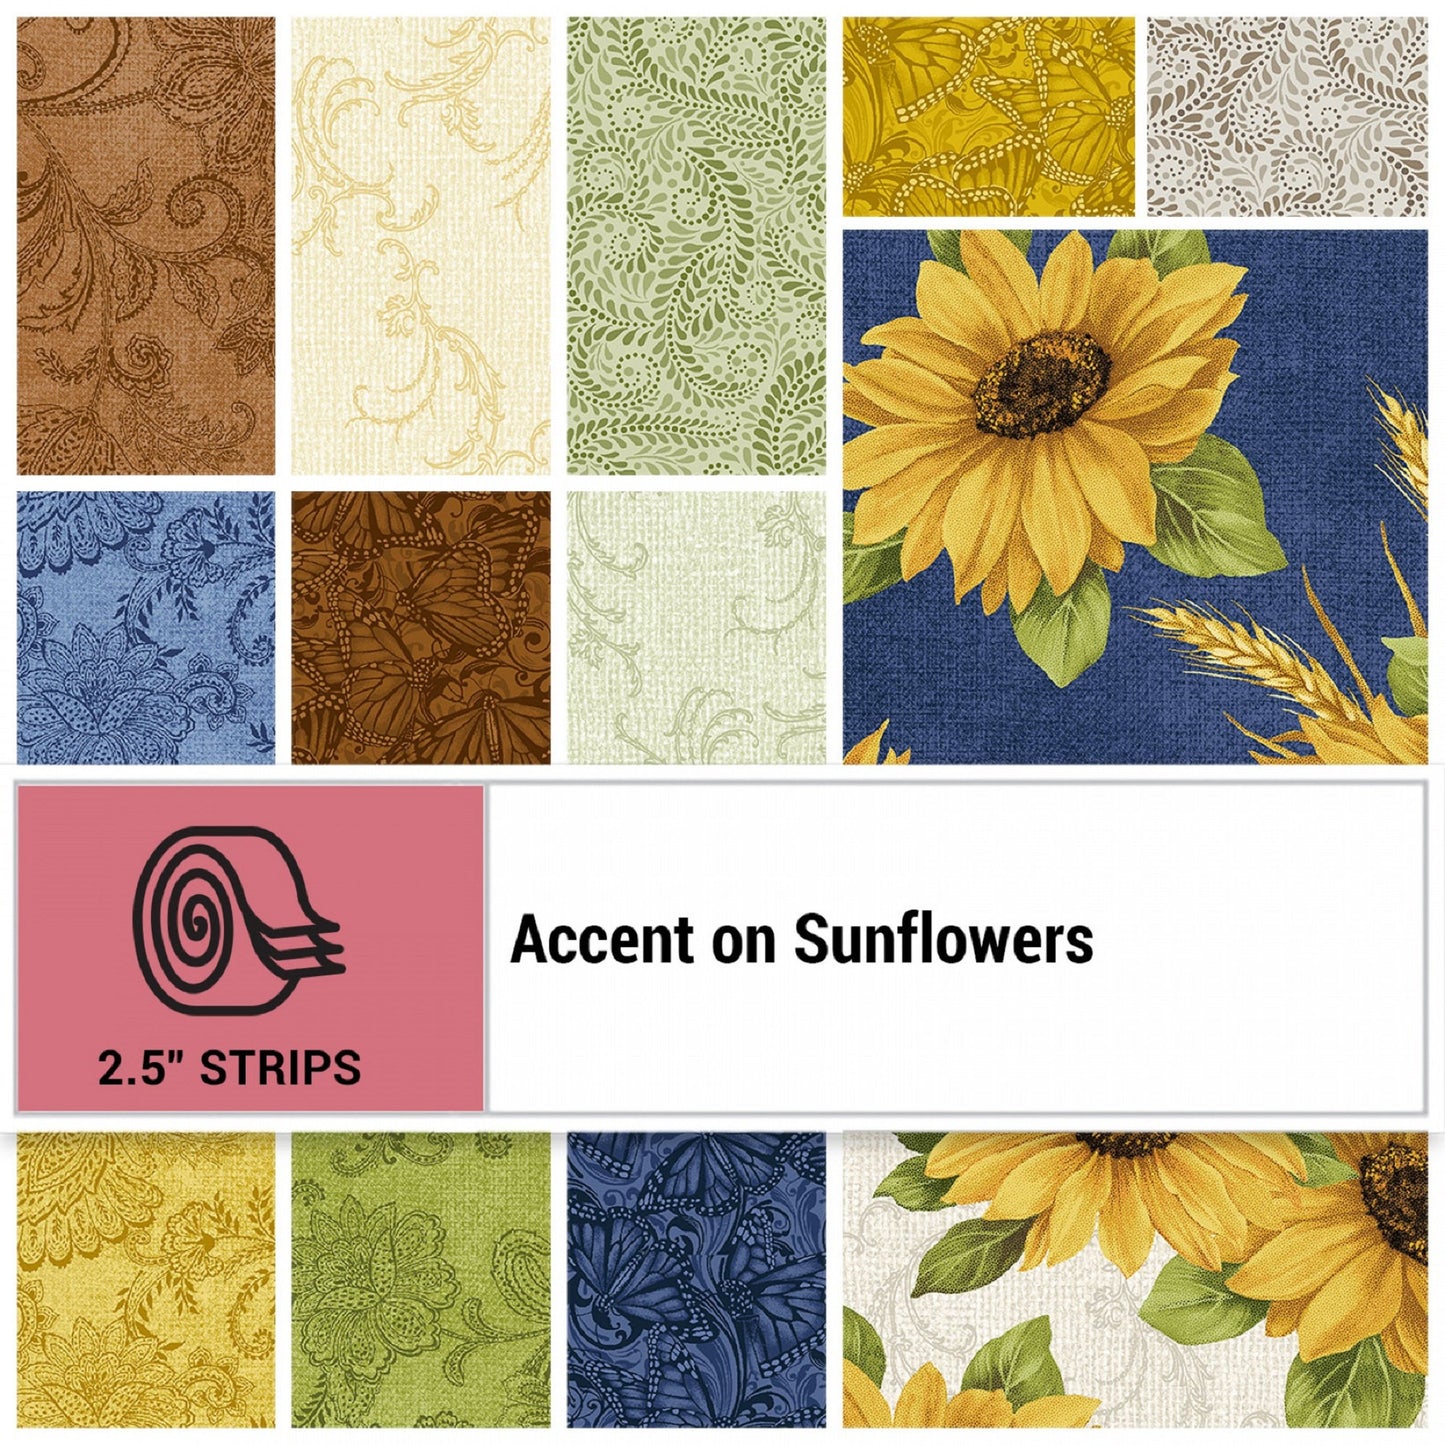 Jelly Roll-"Accent on Sunflowers" 40 Strips by Benartex Fabrics